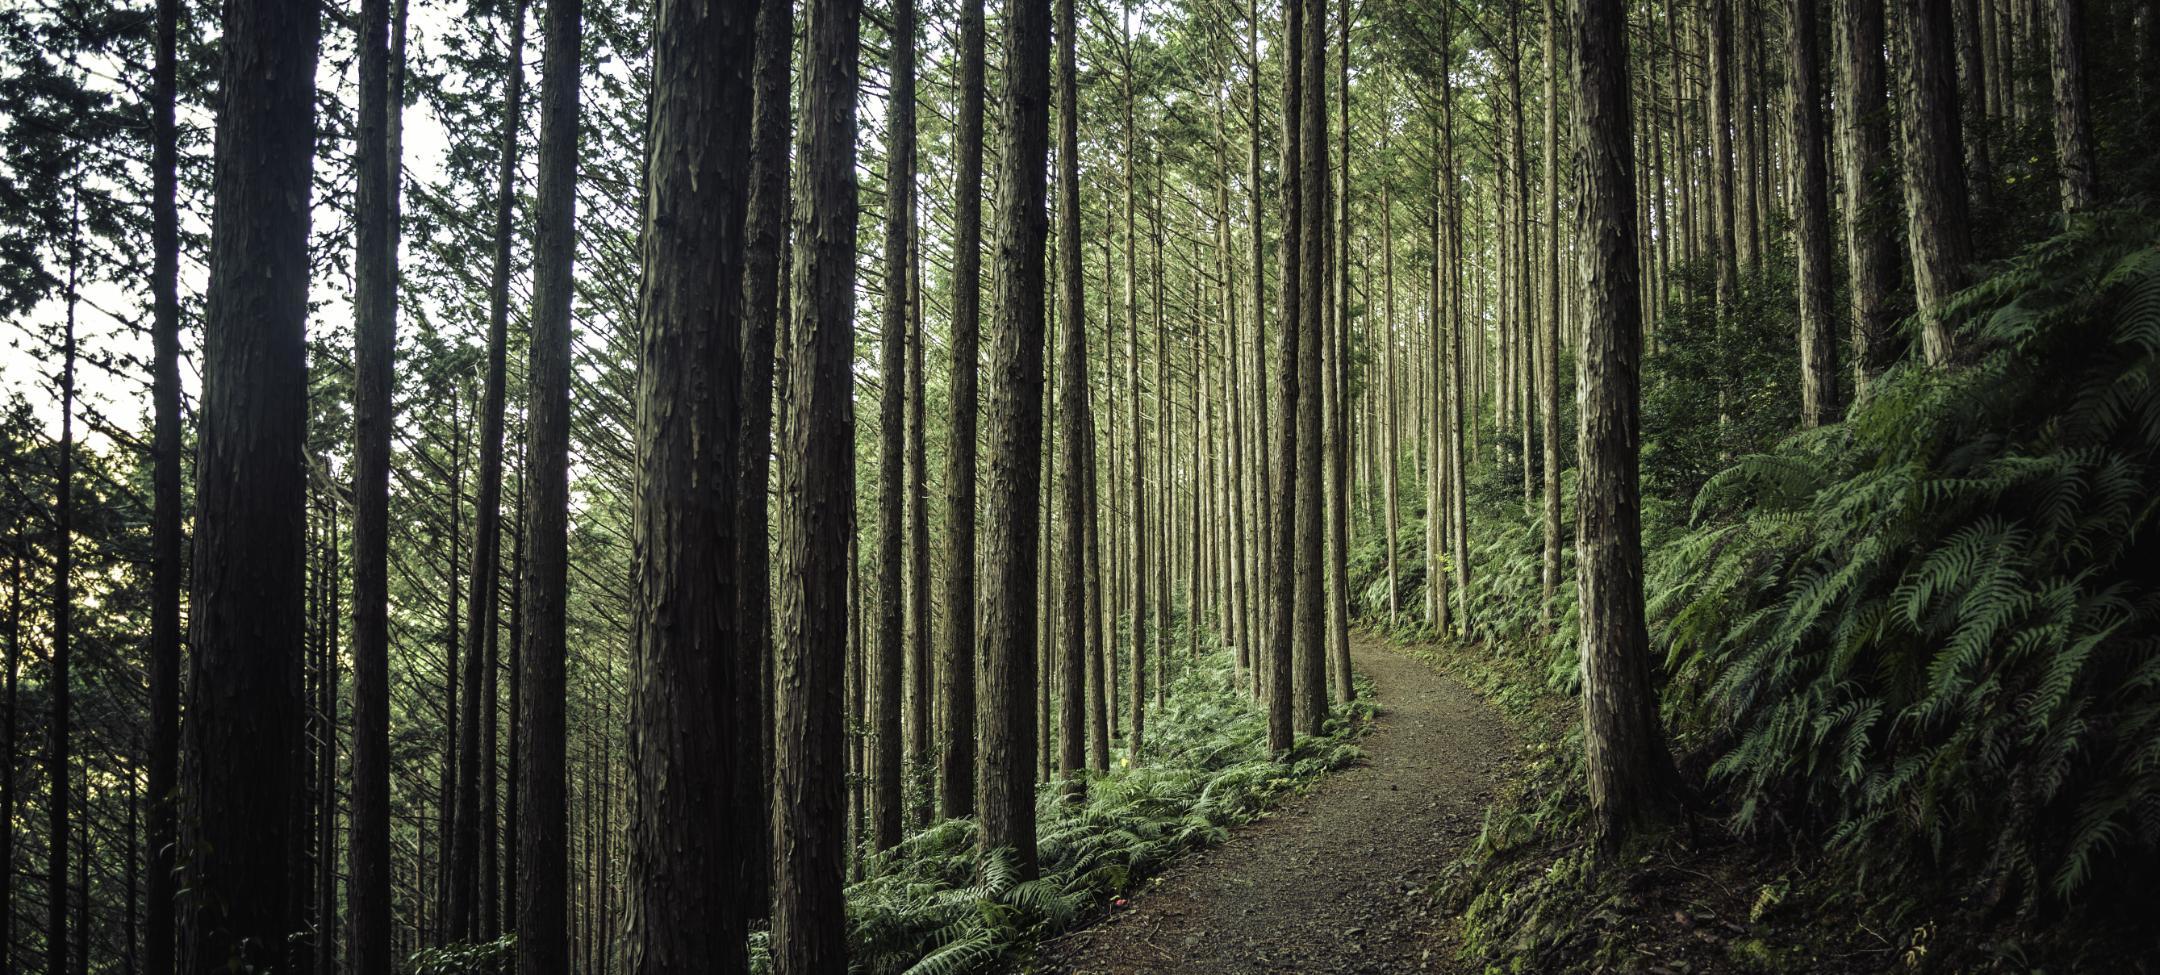 Can your finance team see the forest and the trees?